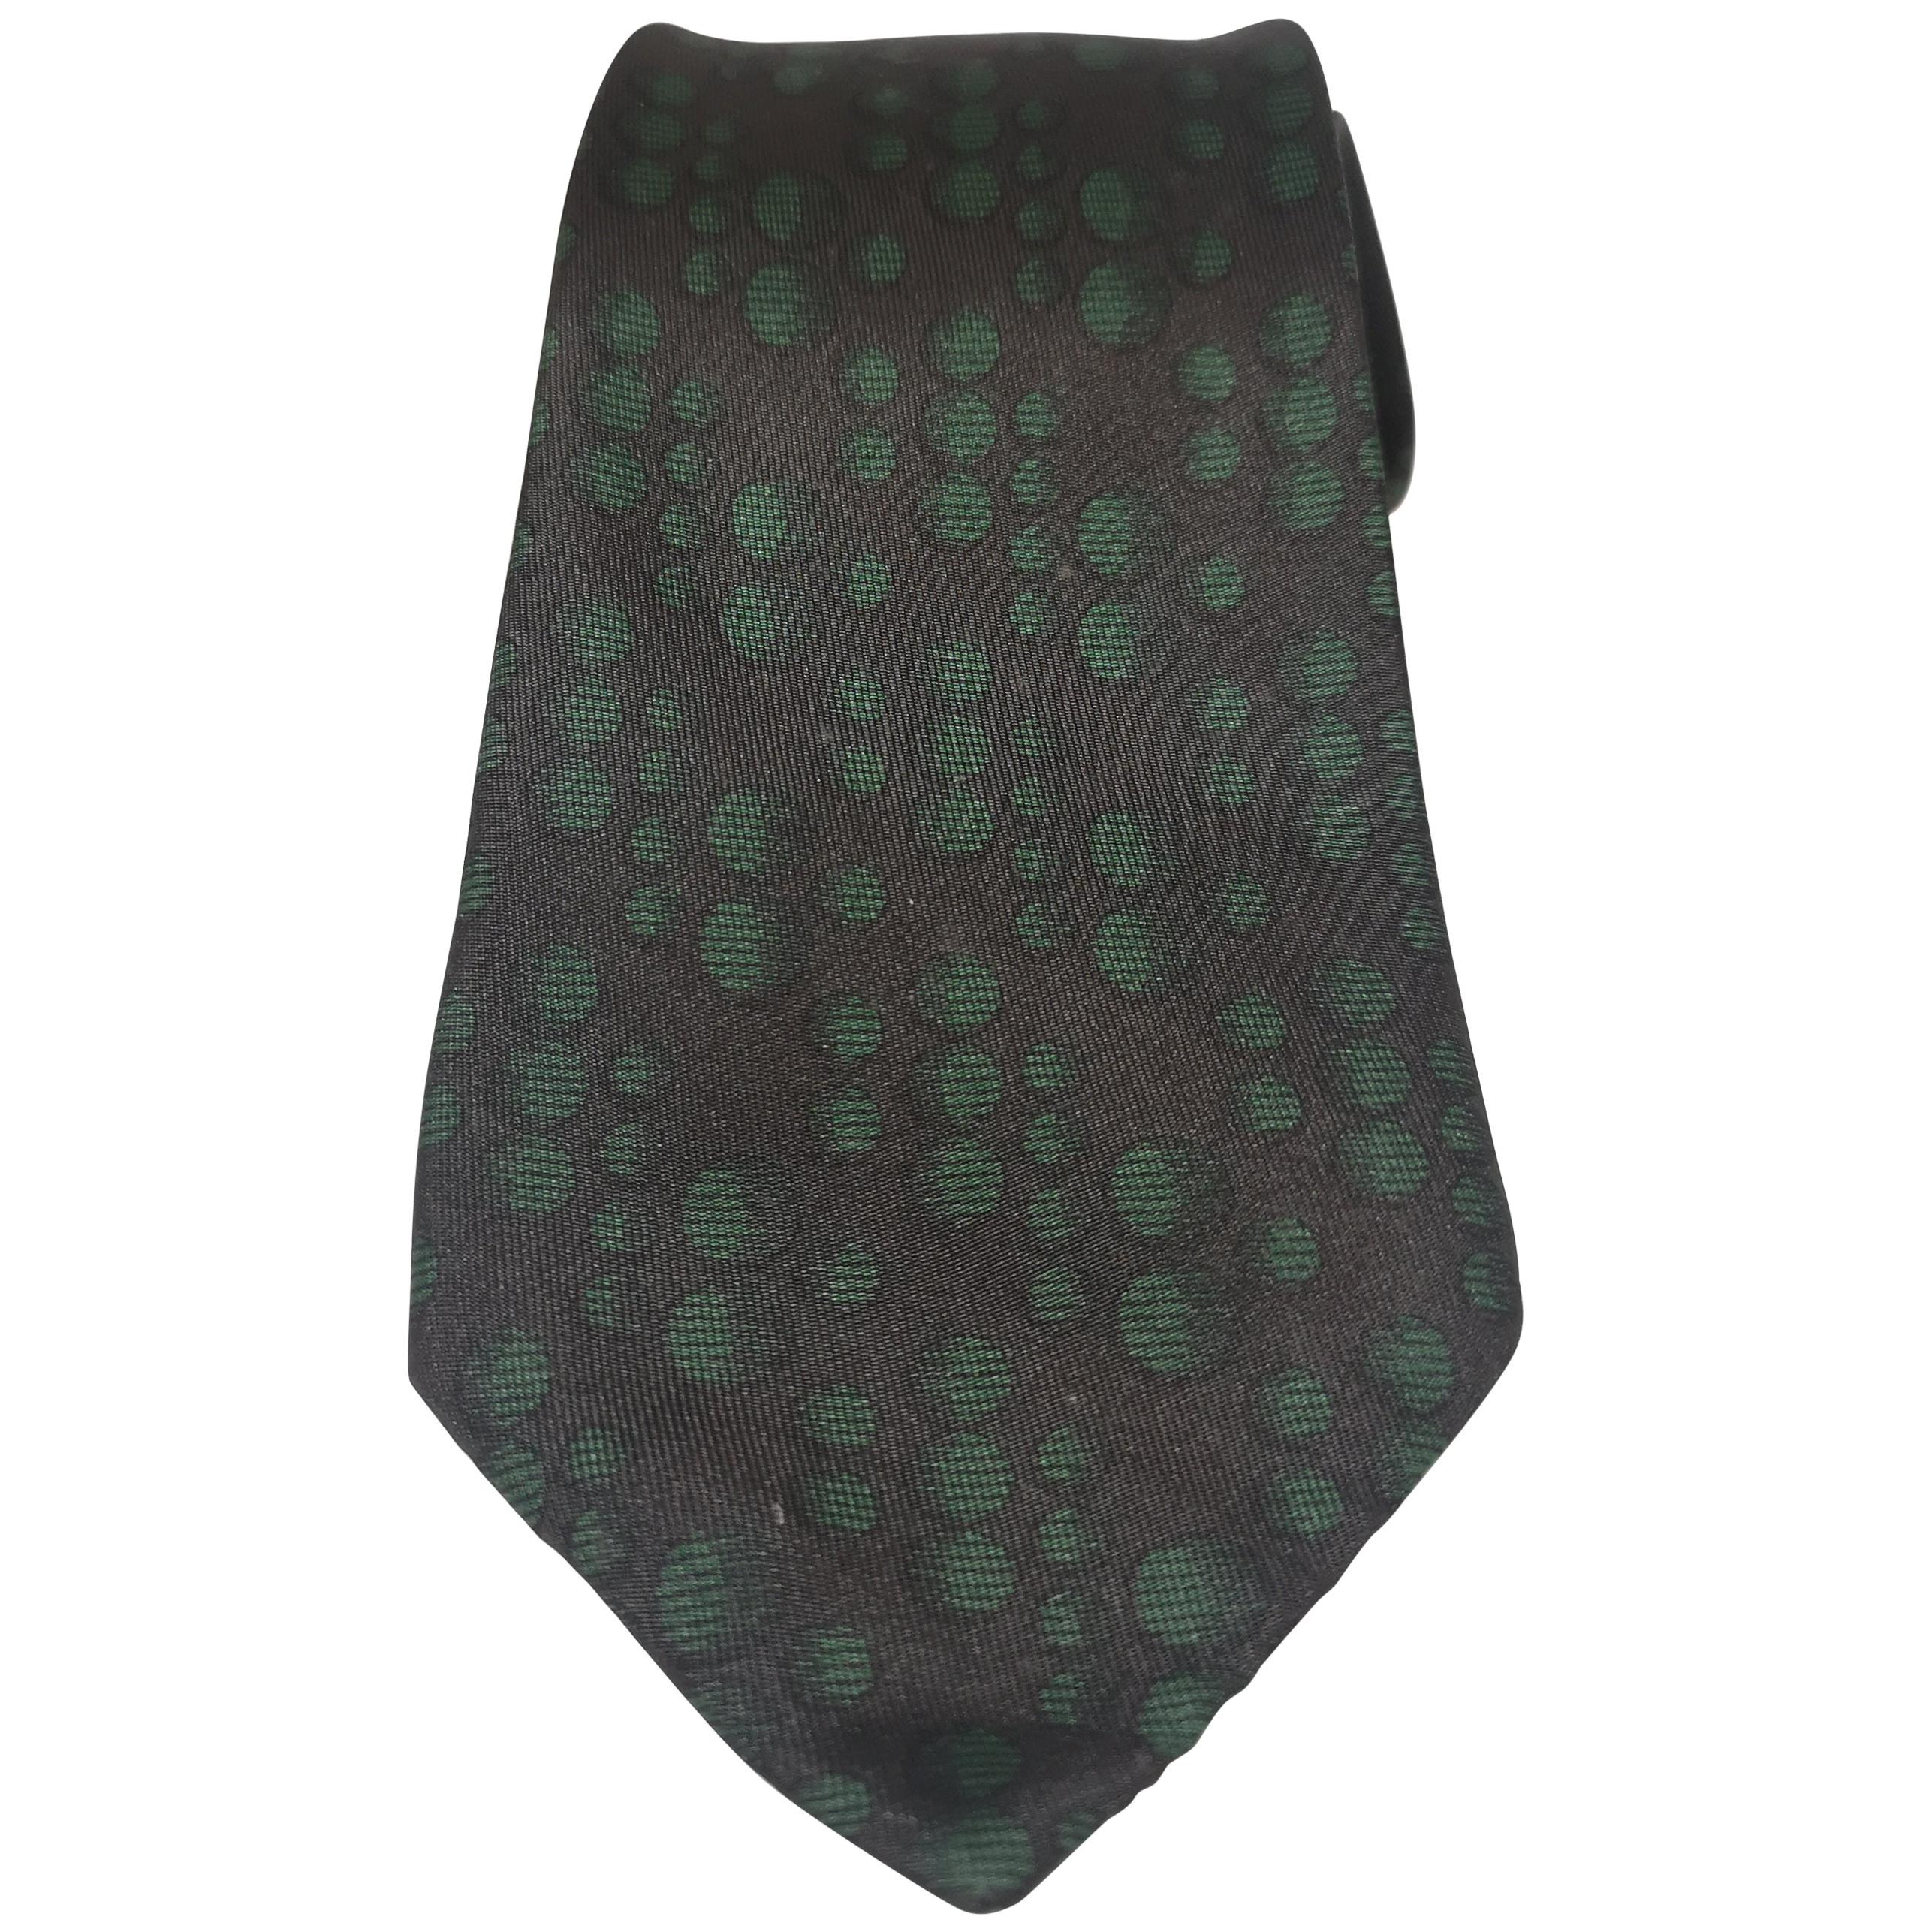 Hermèes black and green silk tie